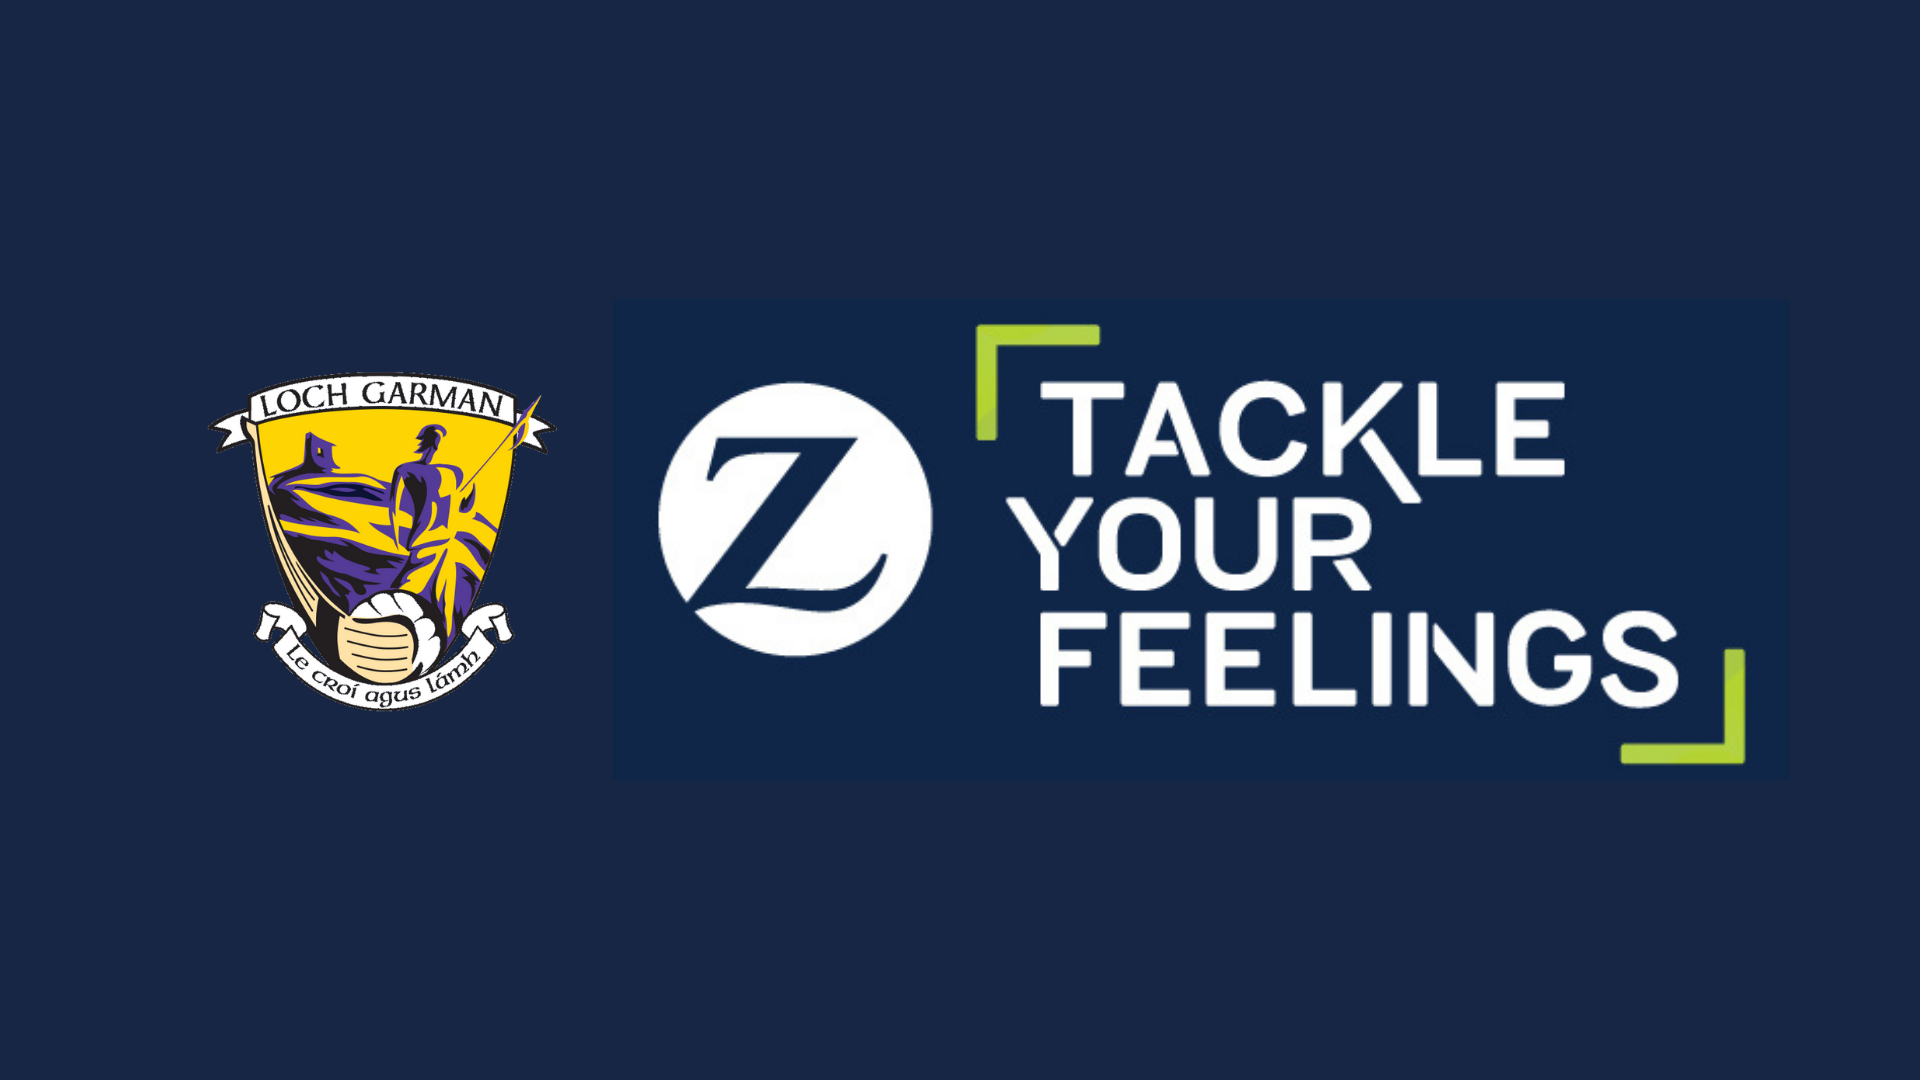 Wexford GAA Launch New Away Jersey Featuring Zurich Tackle Your Feelings Campaign.